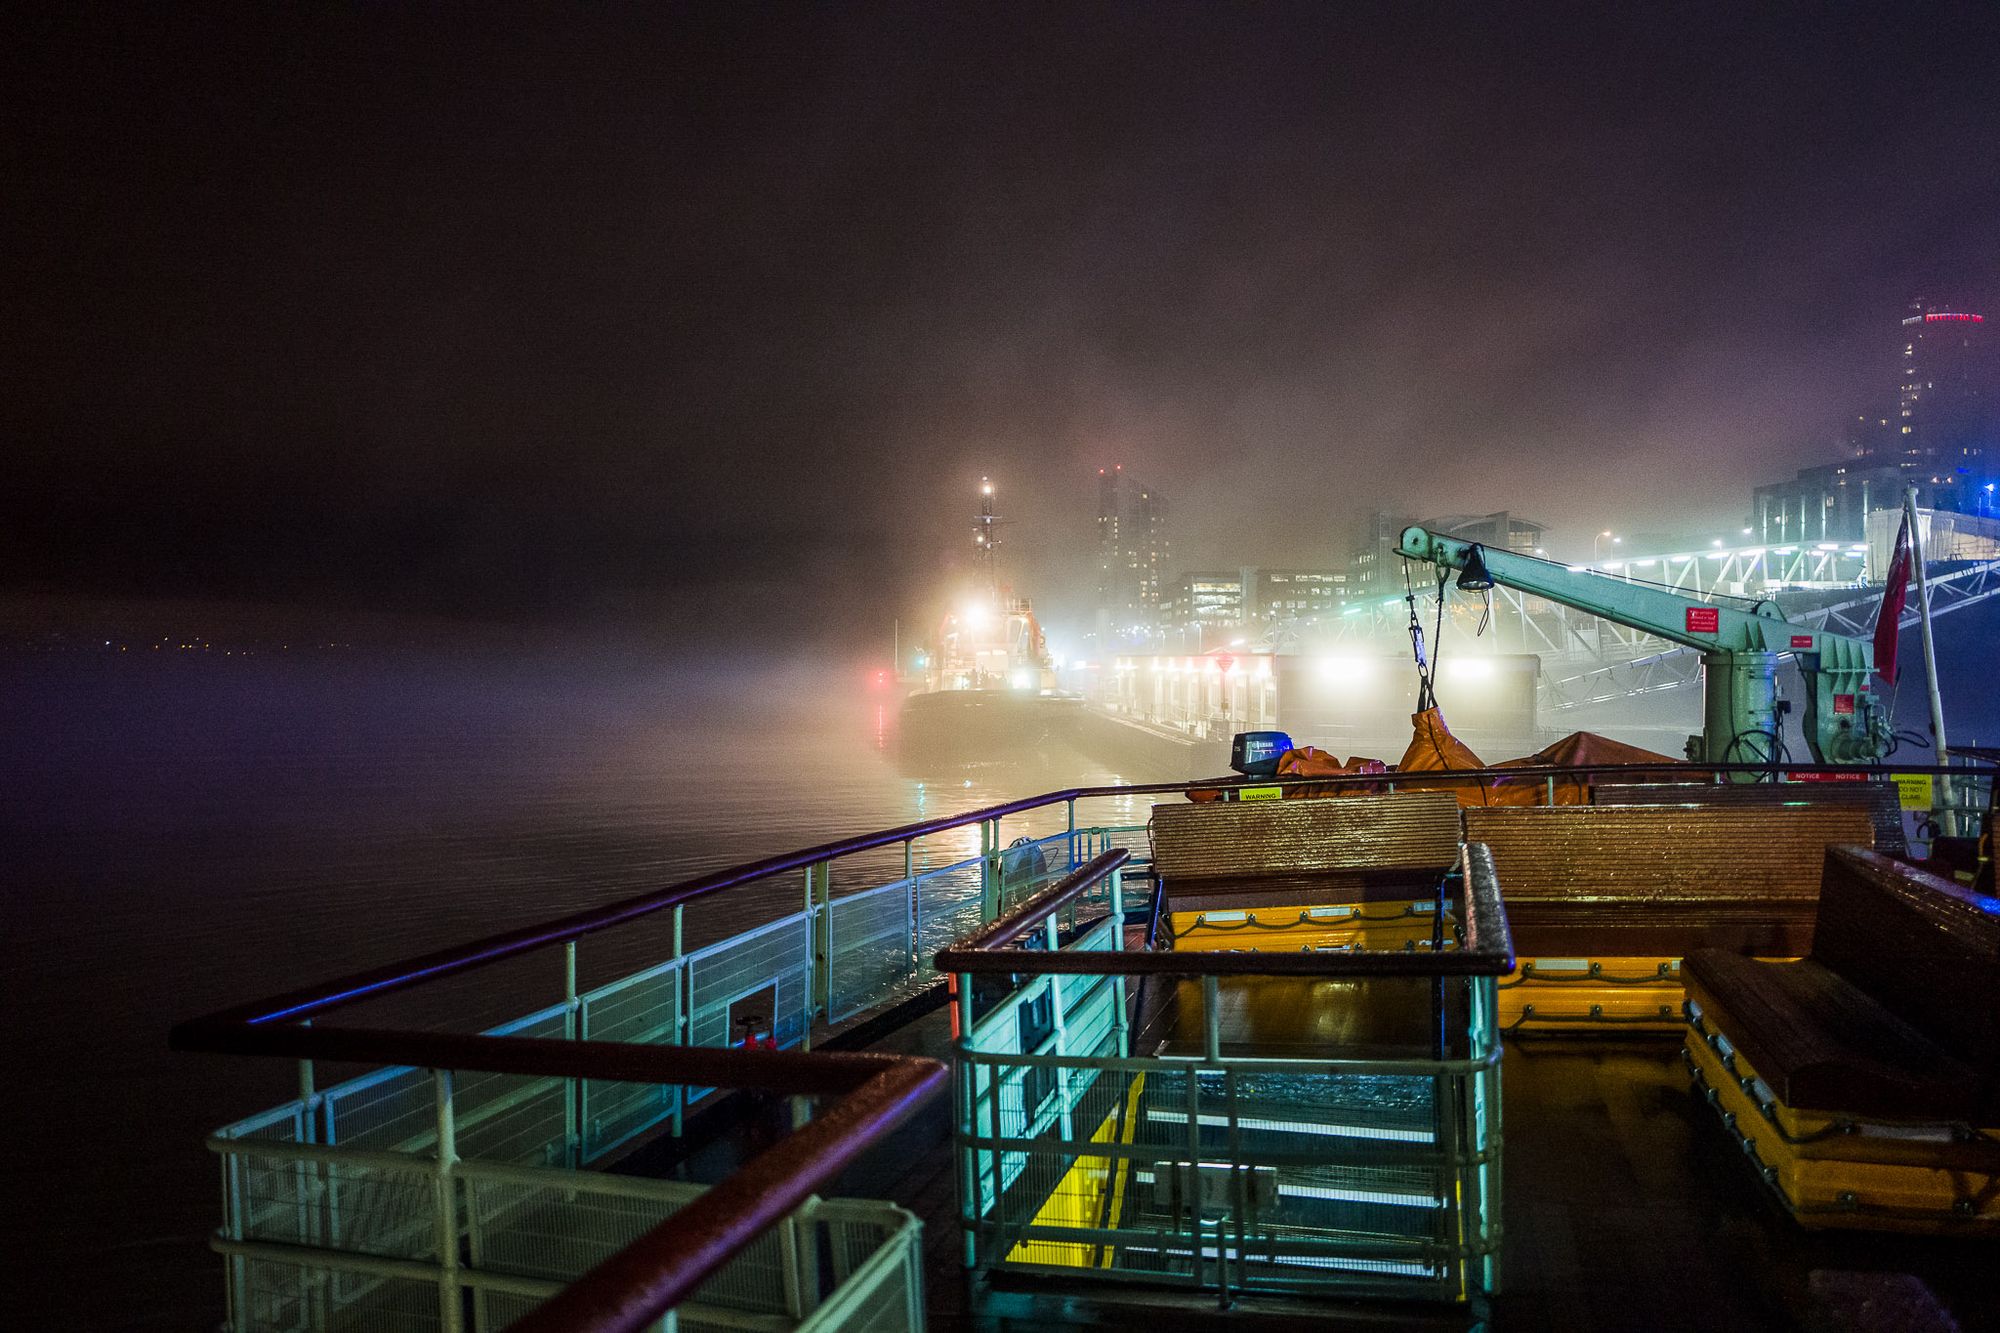 Fog moving over a docked tug boat viewed from the back of a Mersey Ferry.